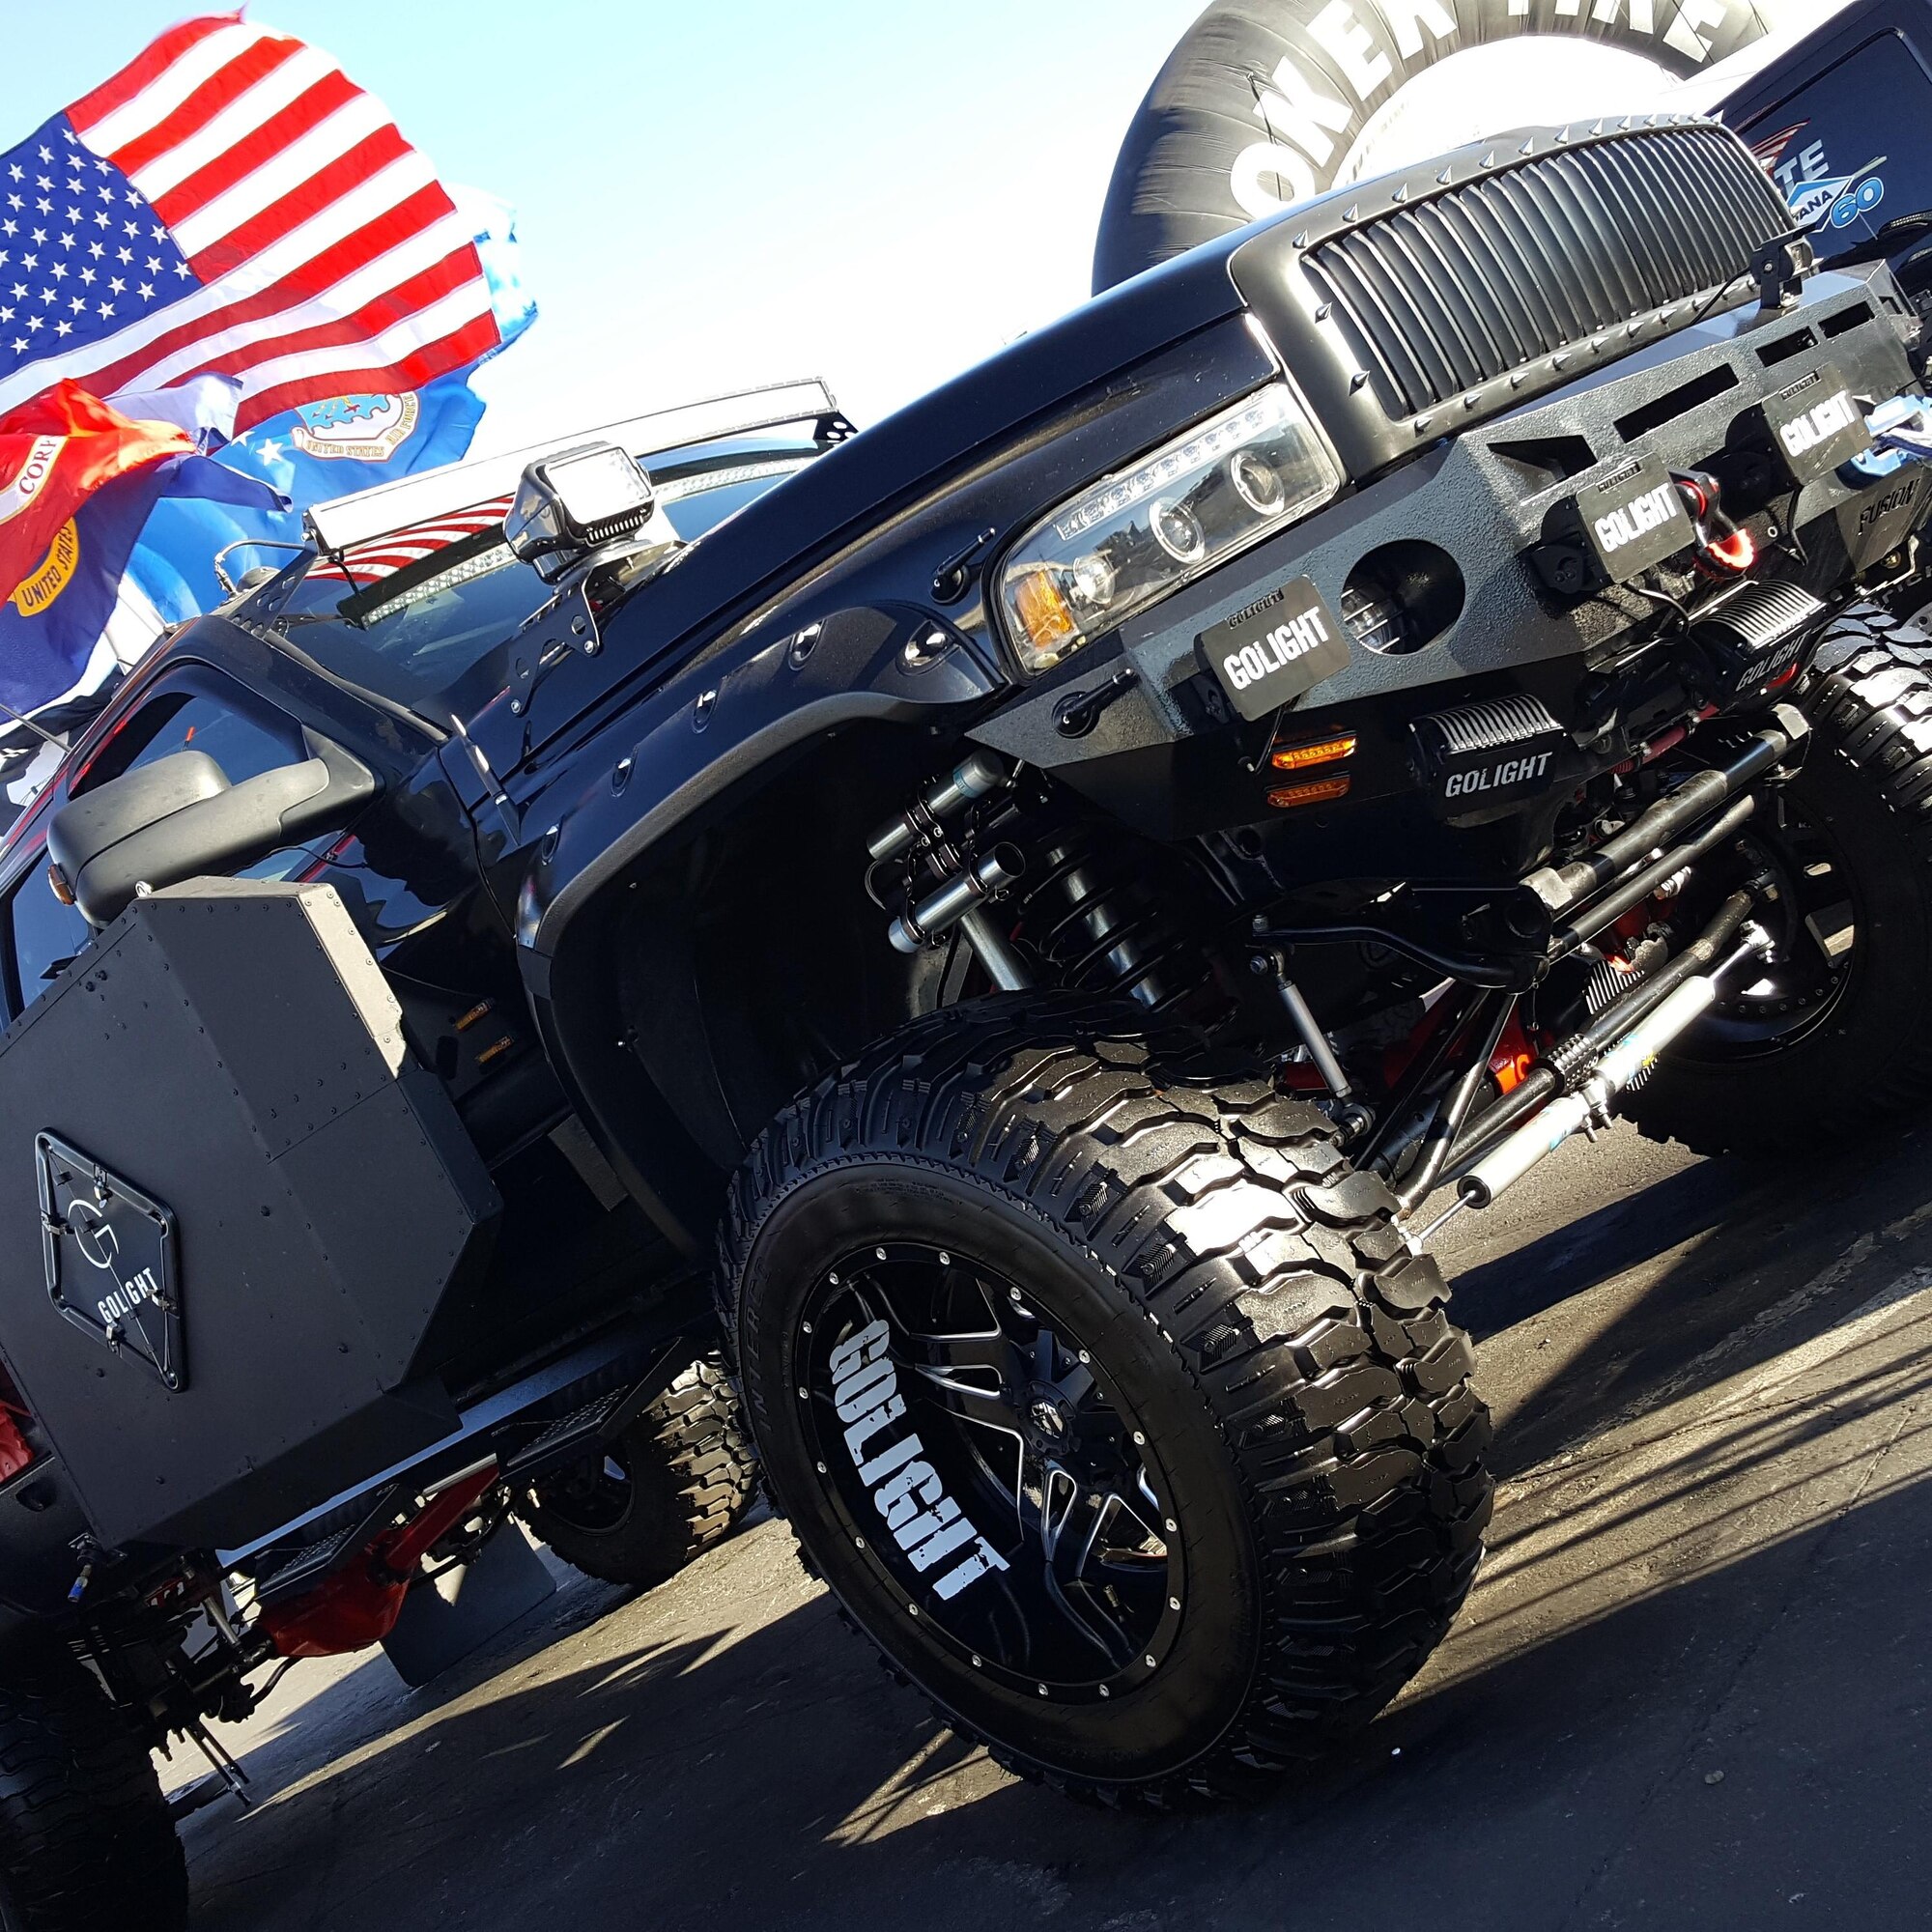 Jason Velez's custom built Dodge Ram 2500. Velez, a retired Airman, served multiple tours in Iraq rebuilt the truck to resemble a vehicle halfway between a personal vehicle and tactical military vehicle. (Courtesy photo)